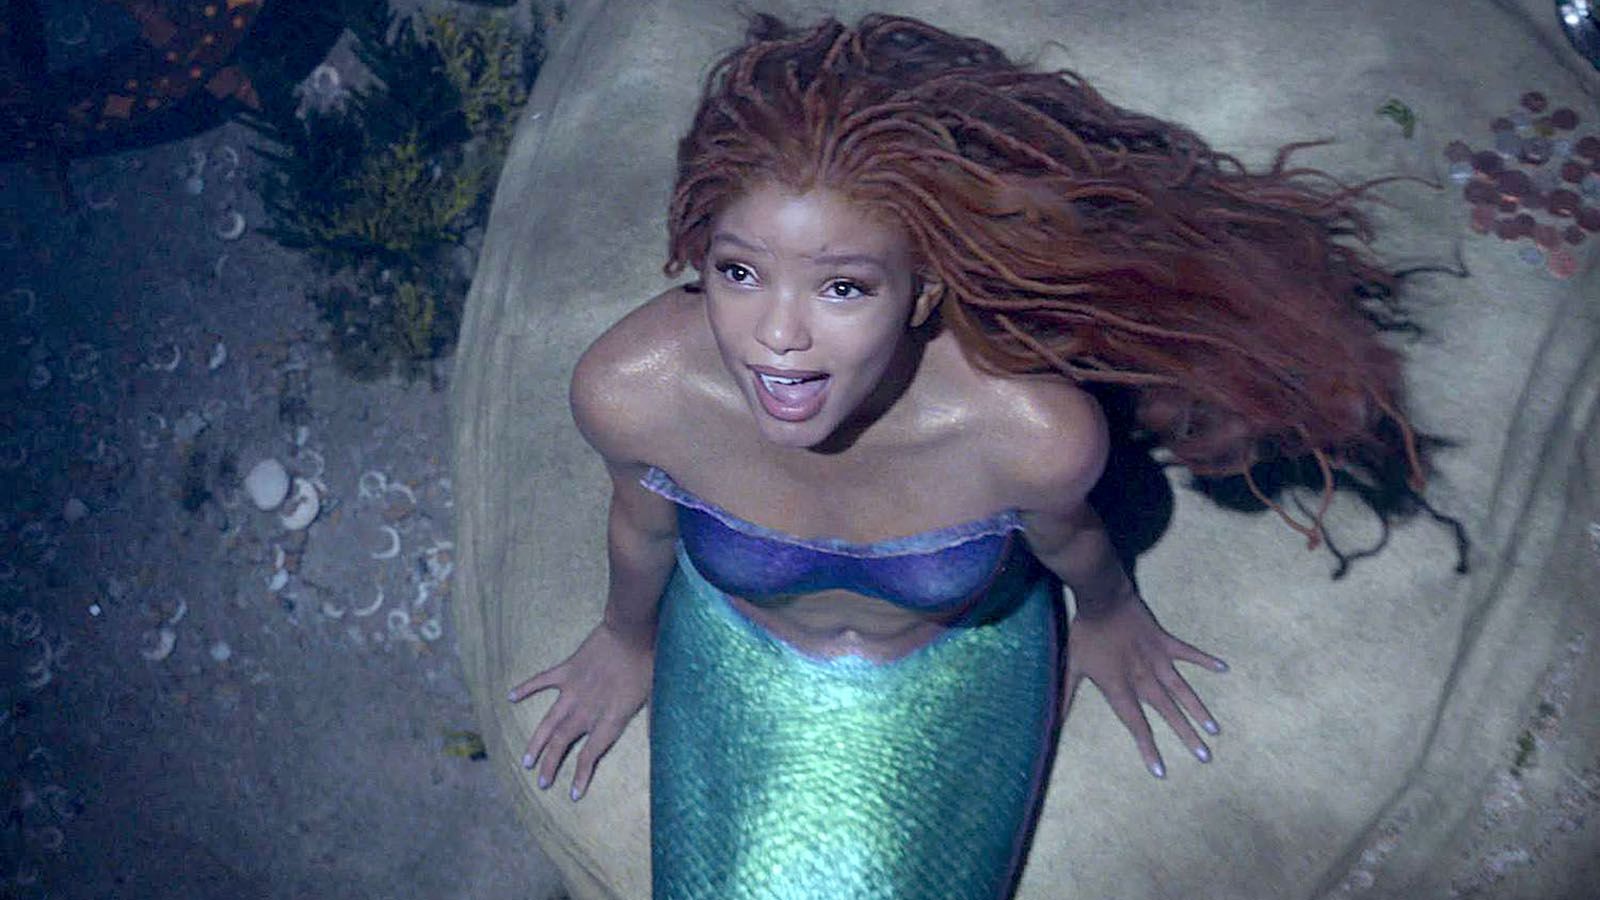 Halle Bailey takes on the role of Ariel in Disney’s live-action remake of The Little Mermaid.